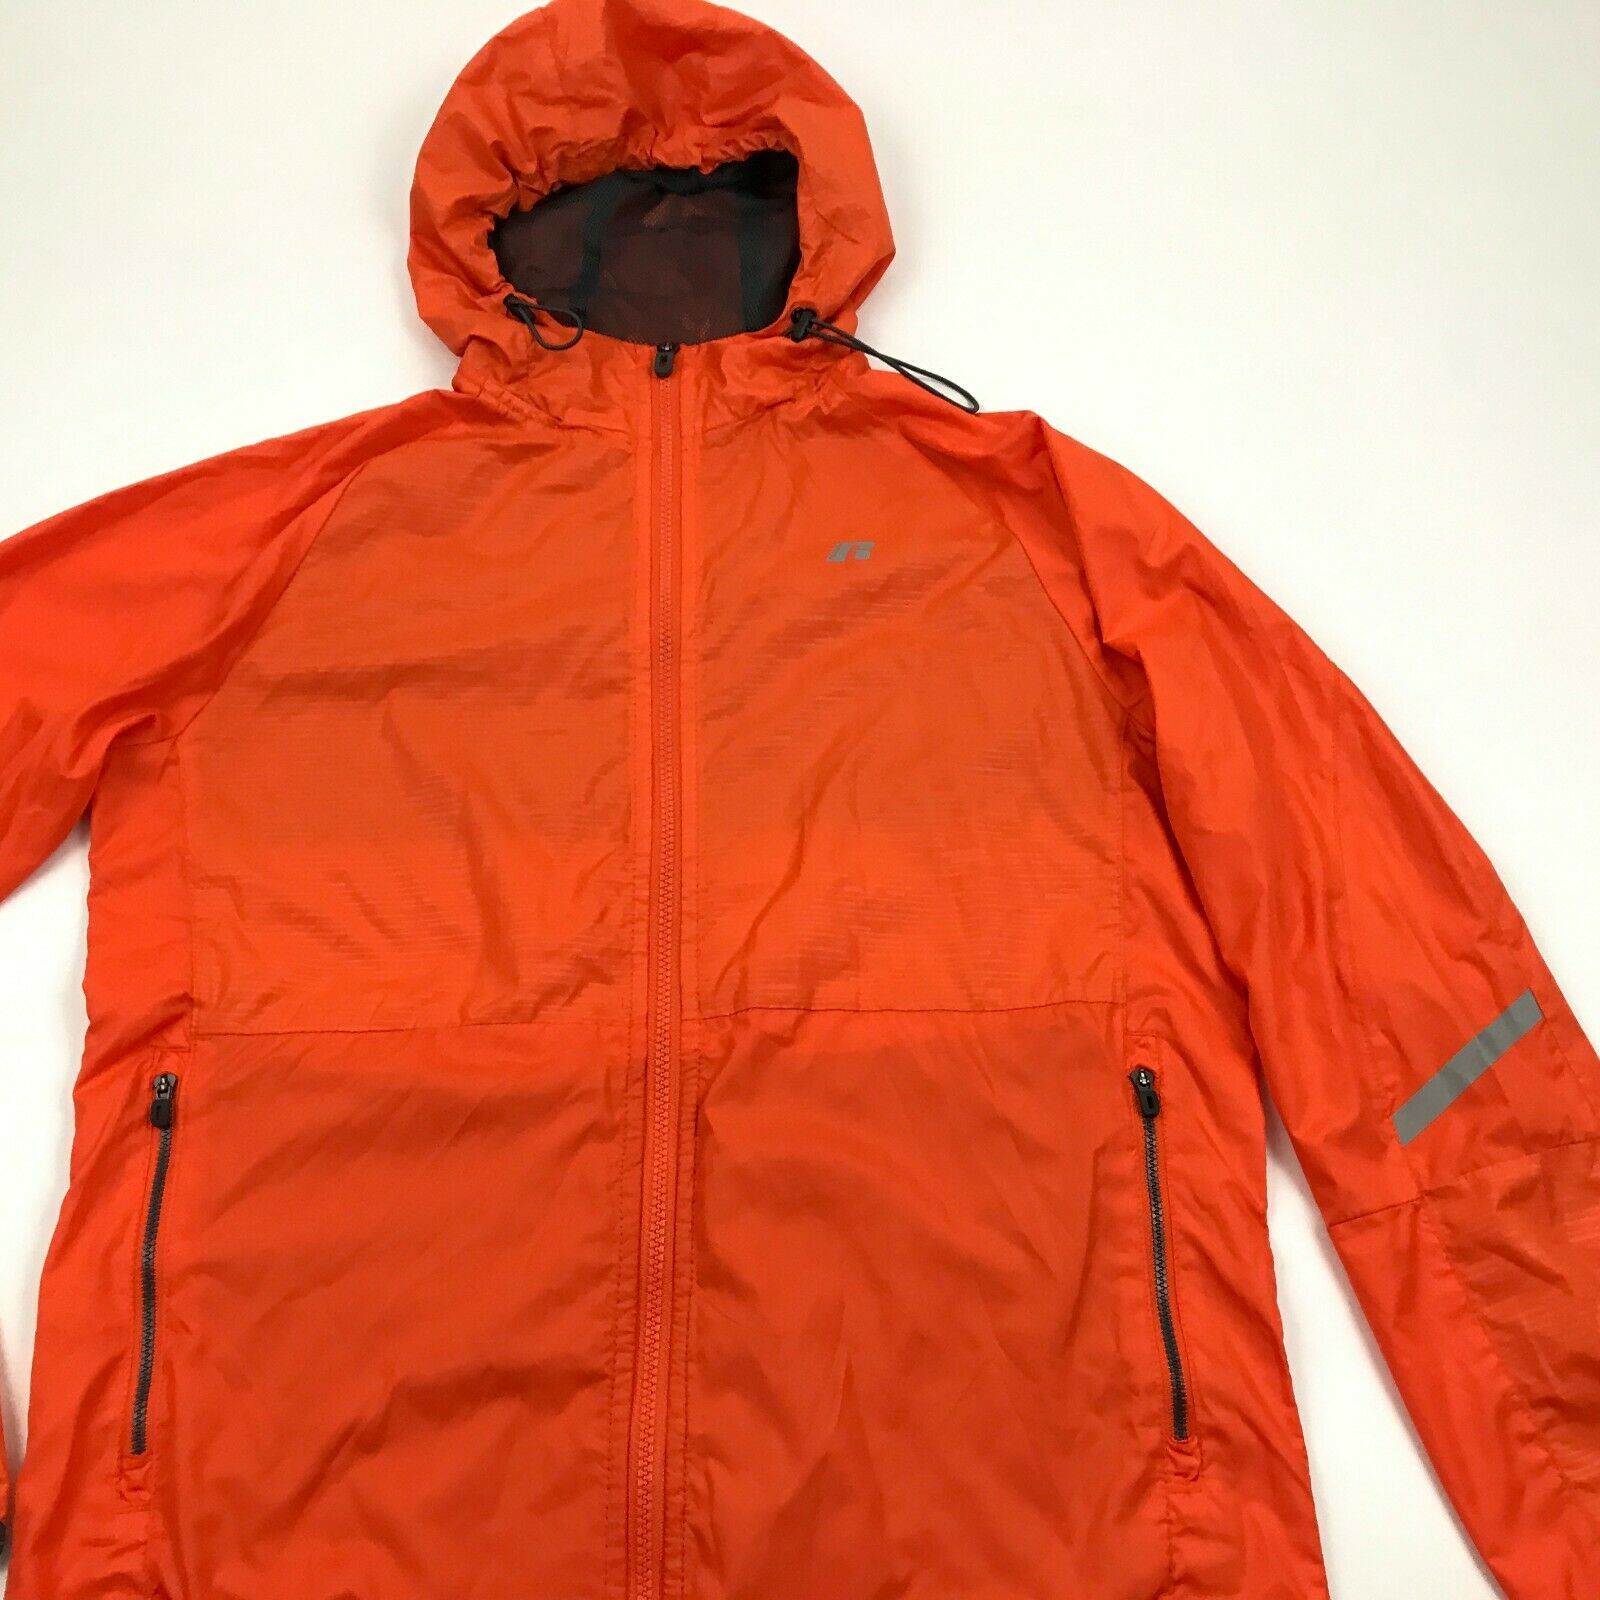 Russell Orange Track Jacket Size S 34 - 36 Full Zip 3M Reflective ...